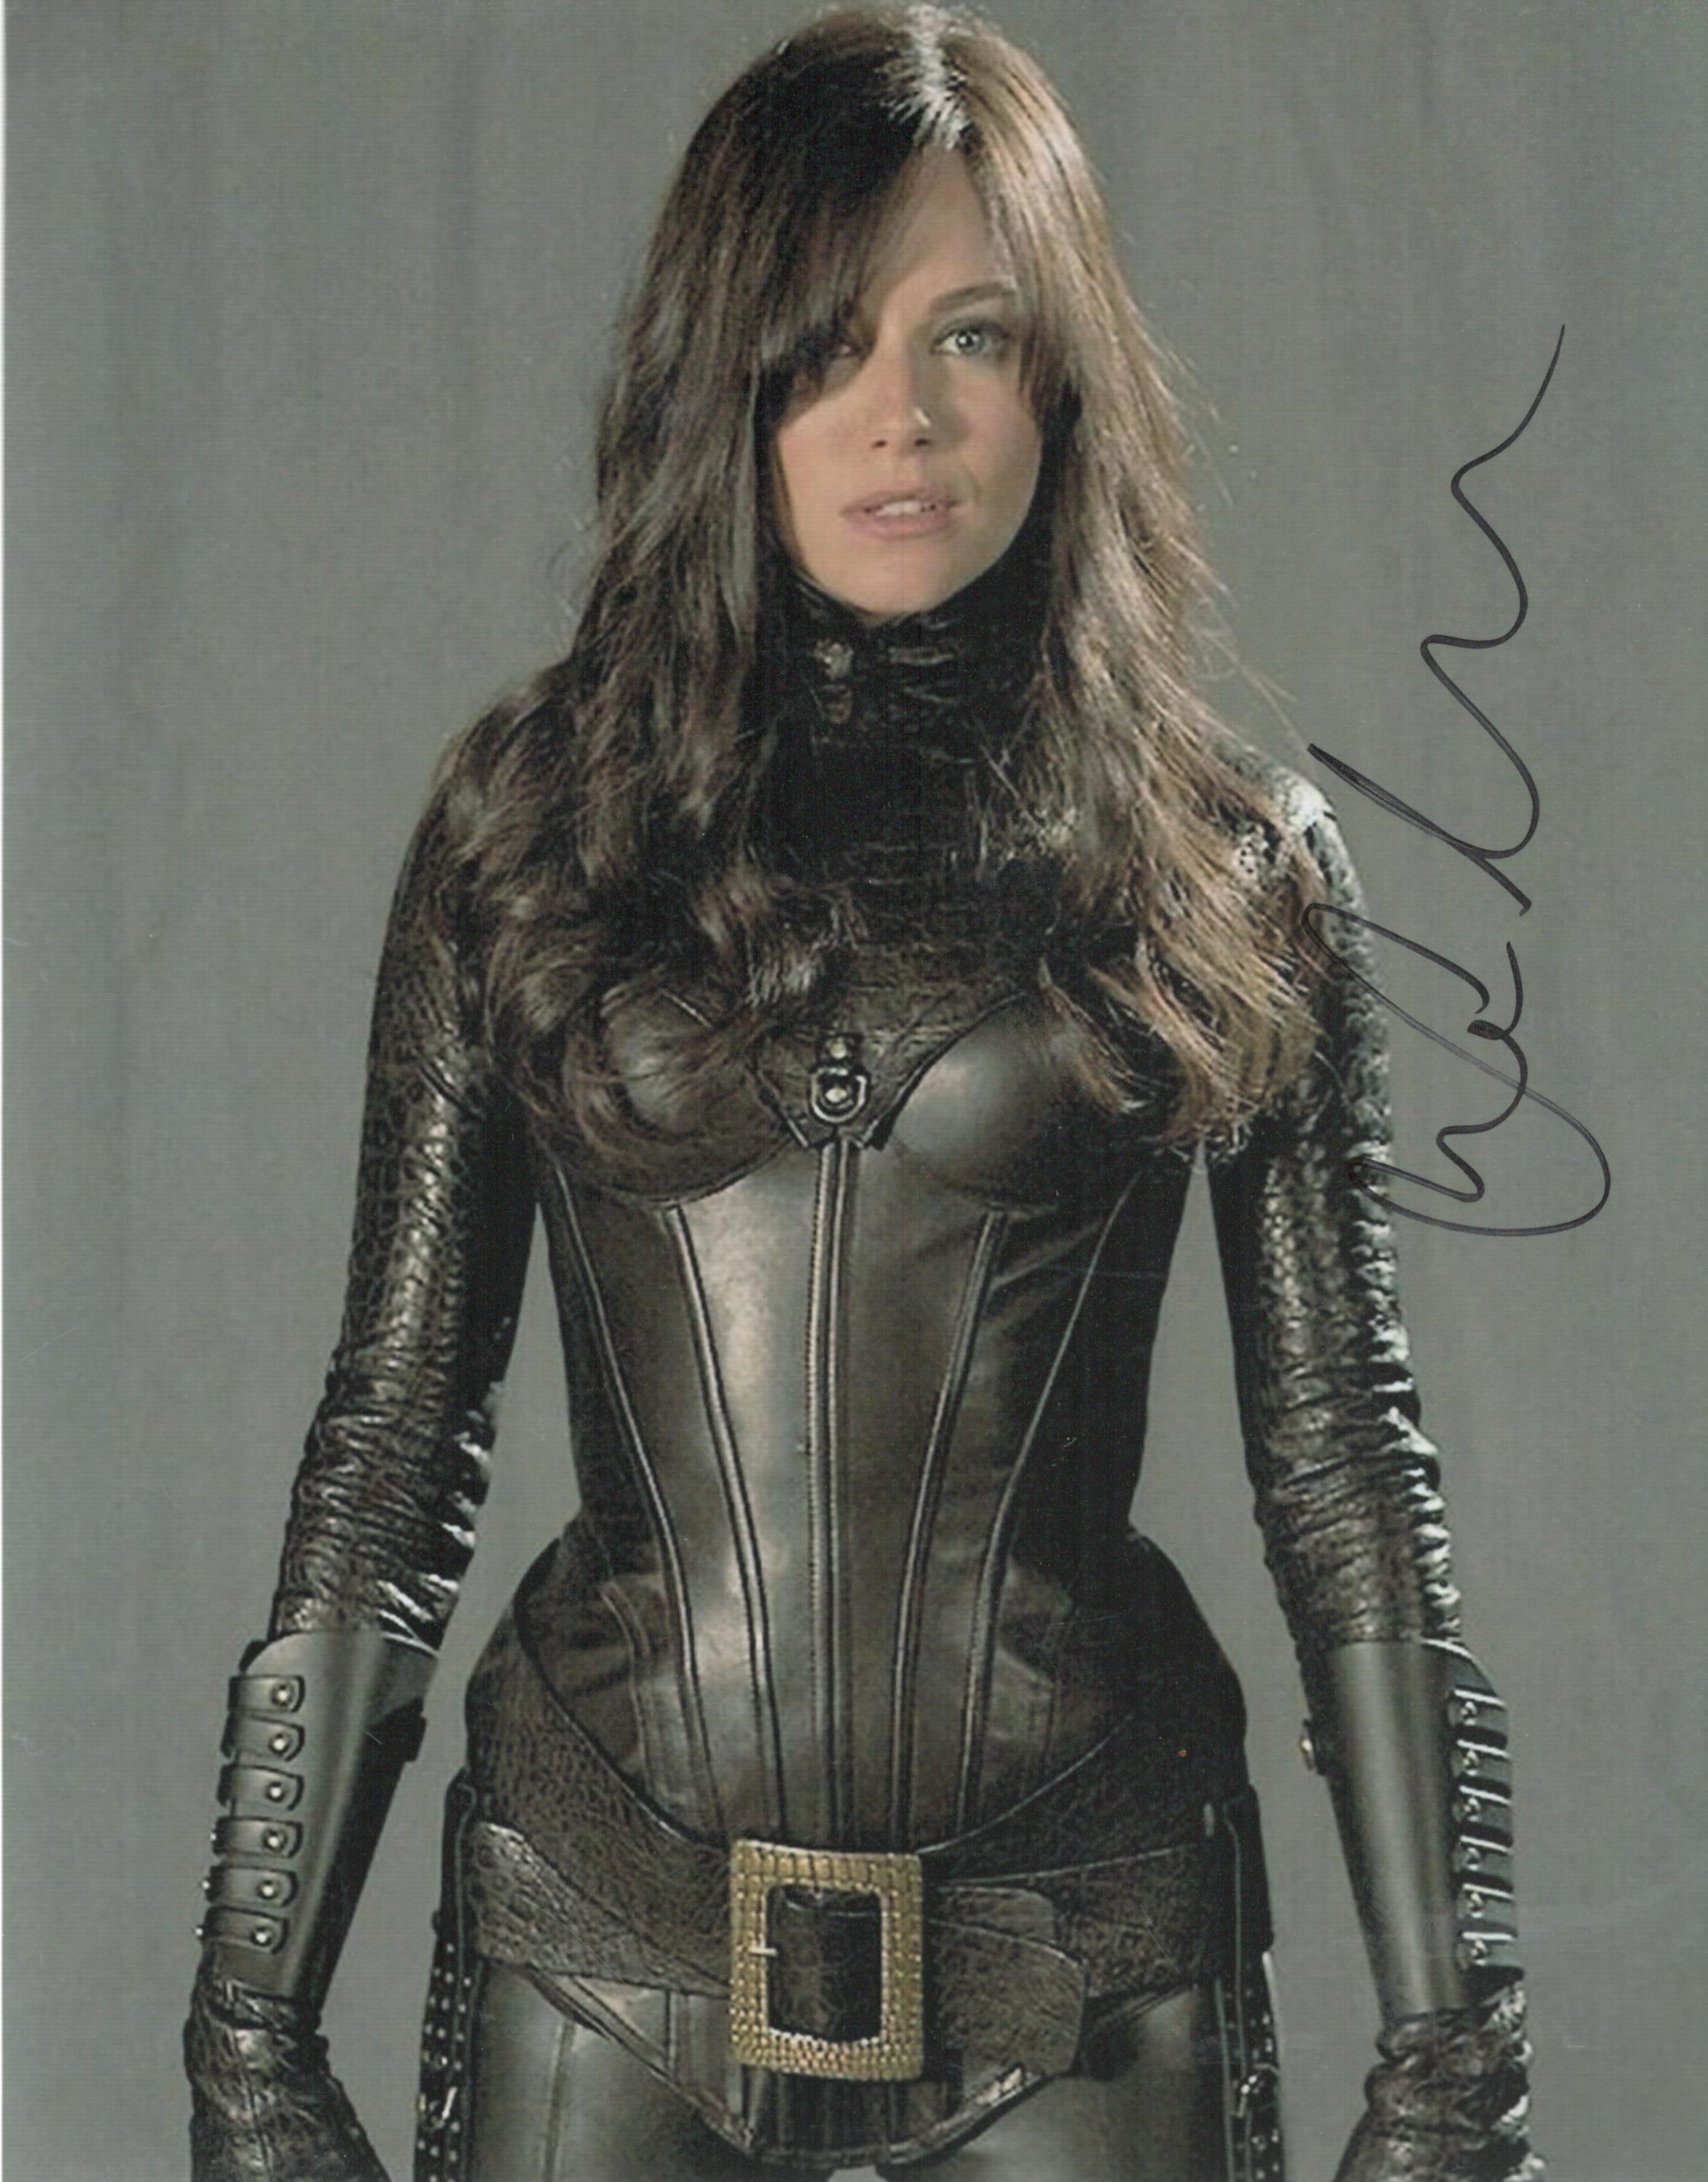 Sienna Miller Signed Colour Photo British American Actress Approx Size 8 x 10 IN. Good condition.